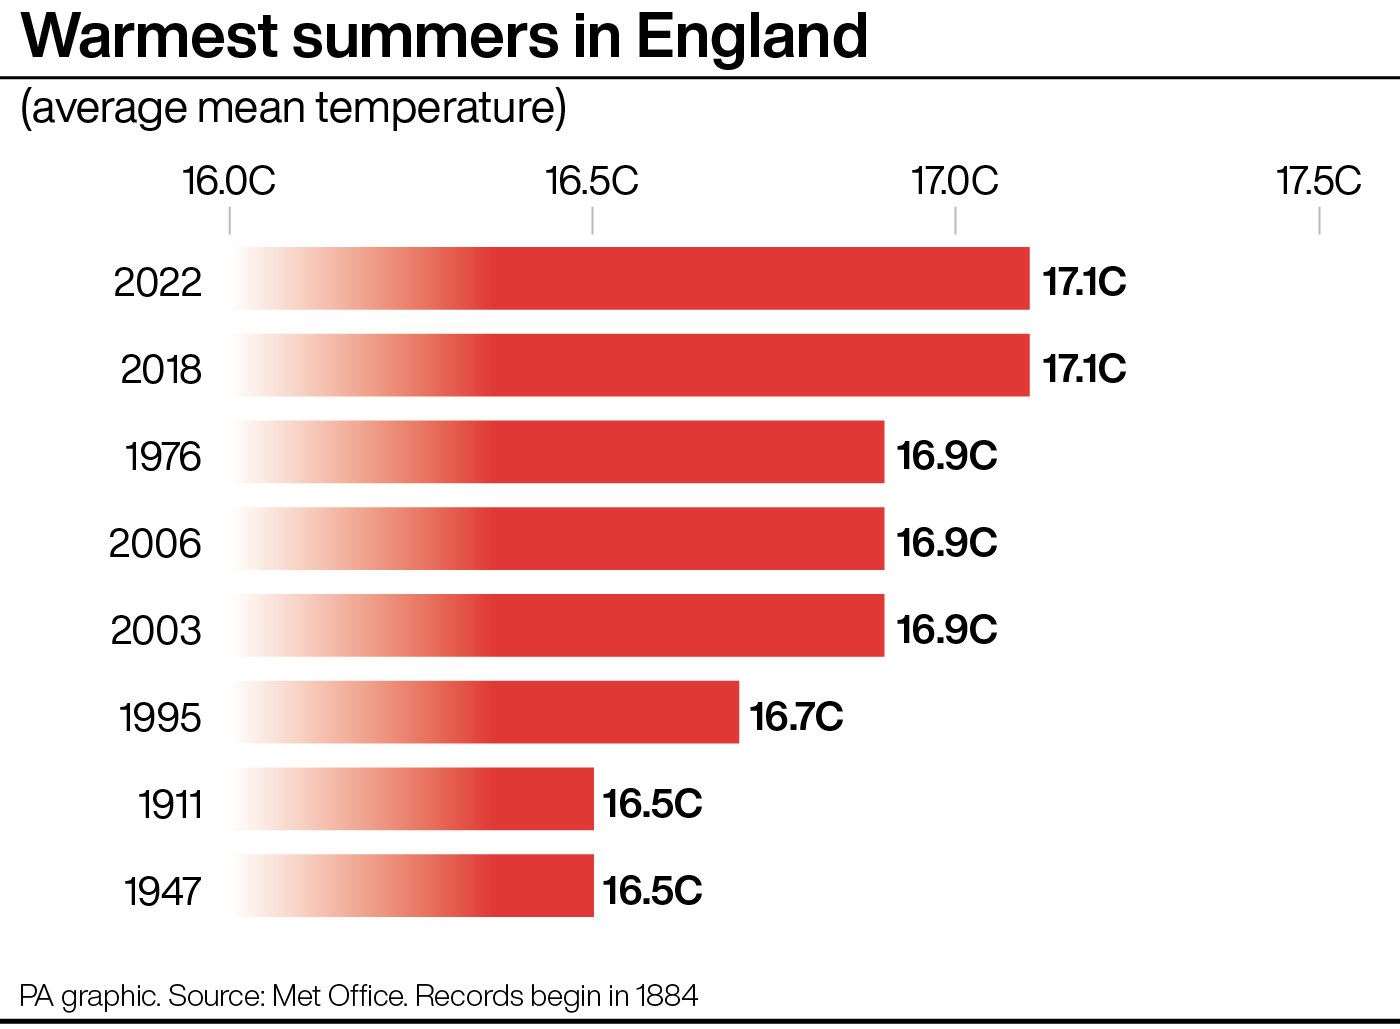 Warmest summers in England (PA Graphics)